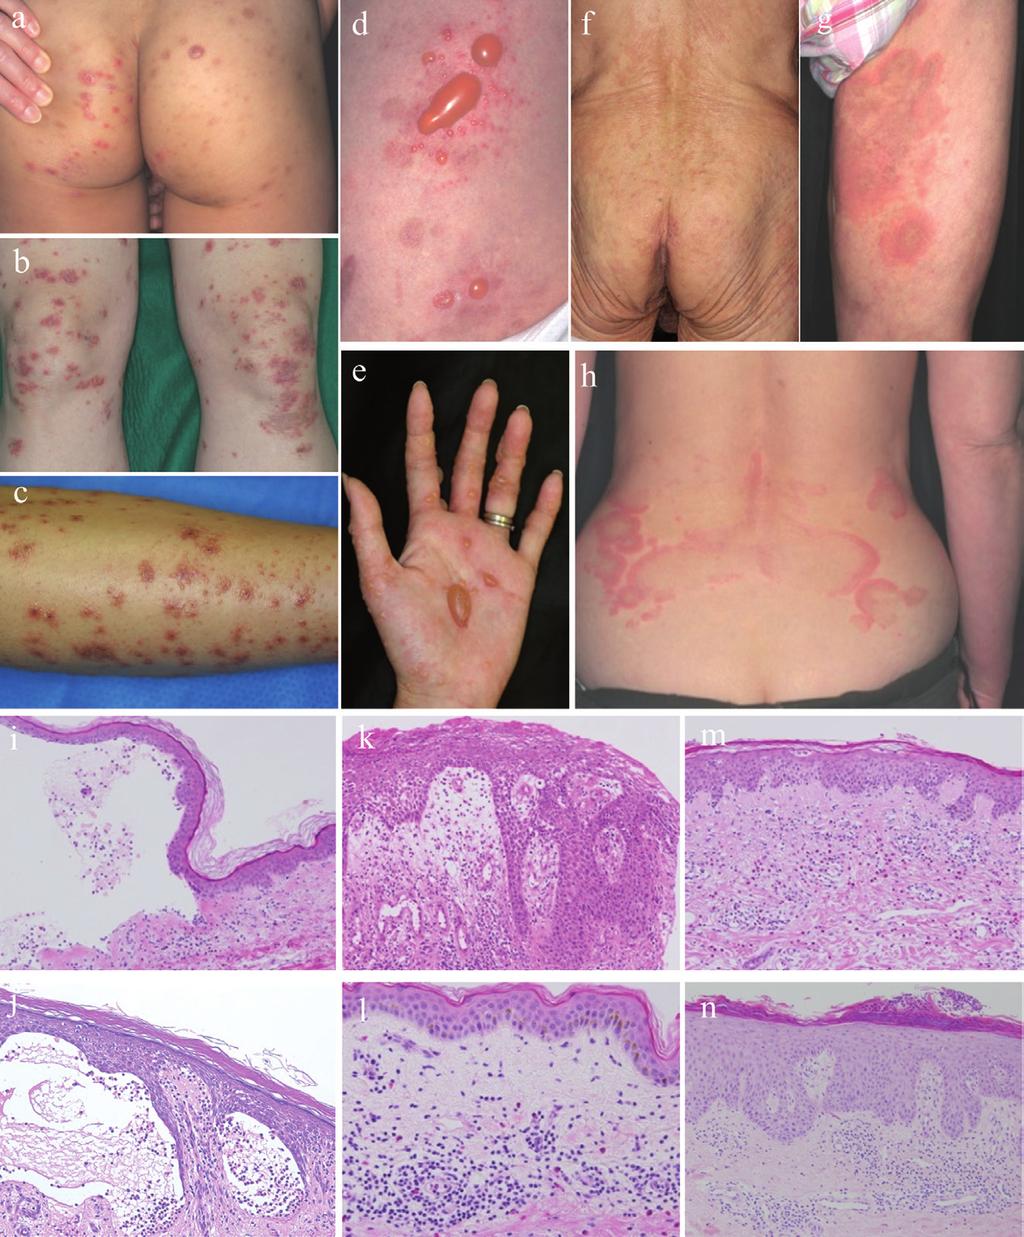 750 T. Hashimoto et al. Fig. 1. Dermatitis herpetiformis-like lesions on (a) the buttock and (b) the knees. (c) Vesicles and eczematous lesions on the shins.